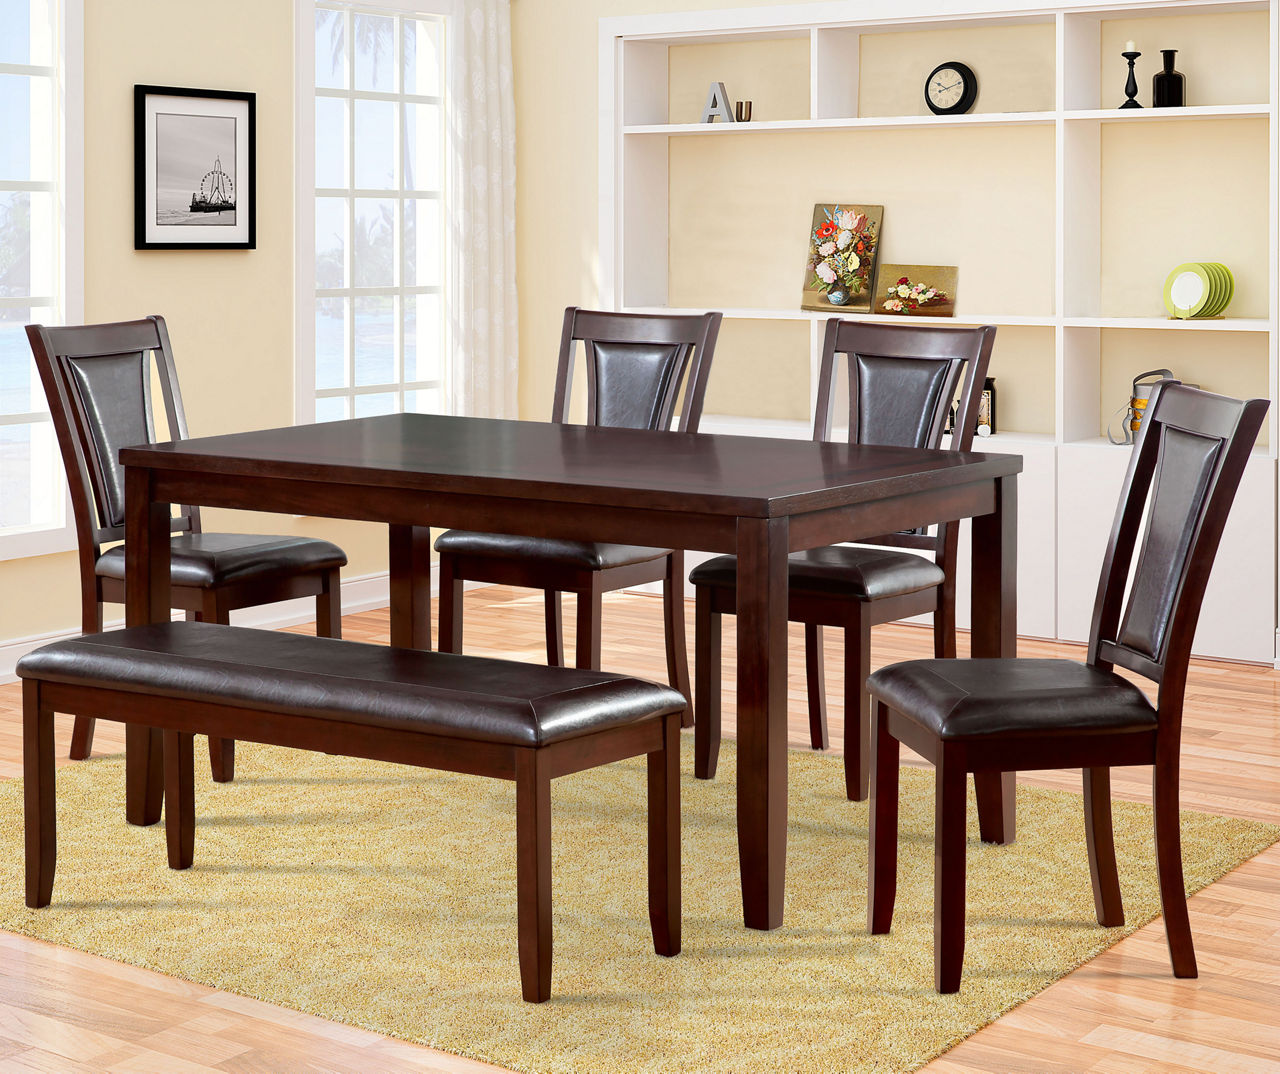 9 Piece - Dining Room Sets - Kitchen & Dining Room Furniture - The Home  Depot